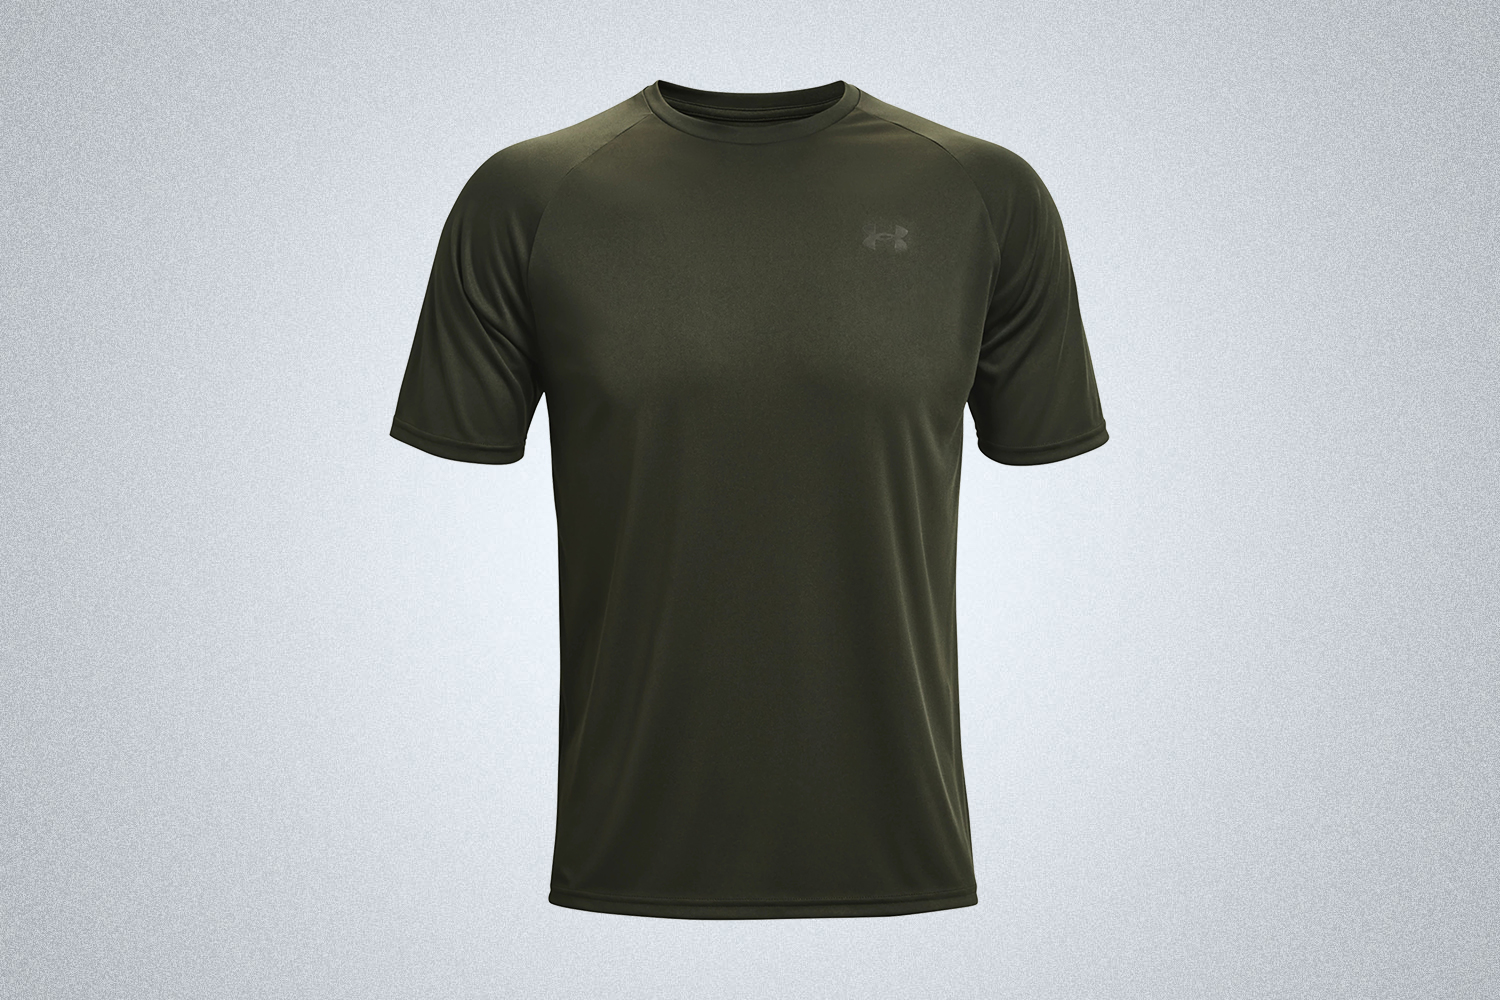 Laboratorium twaalf genoeg Take Up to 50% Off Workout Gear at Under Armour's Sale - InsideHook